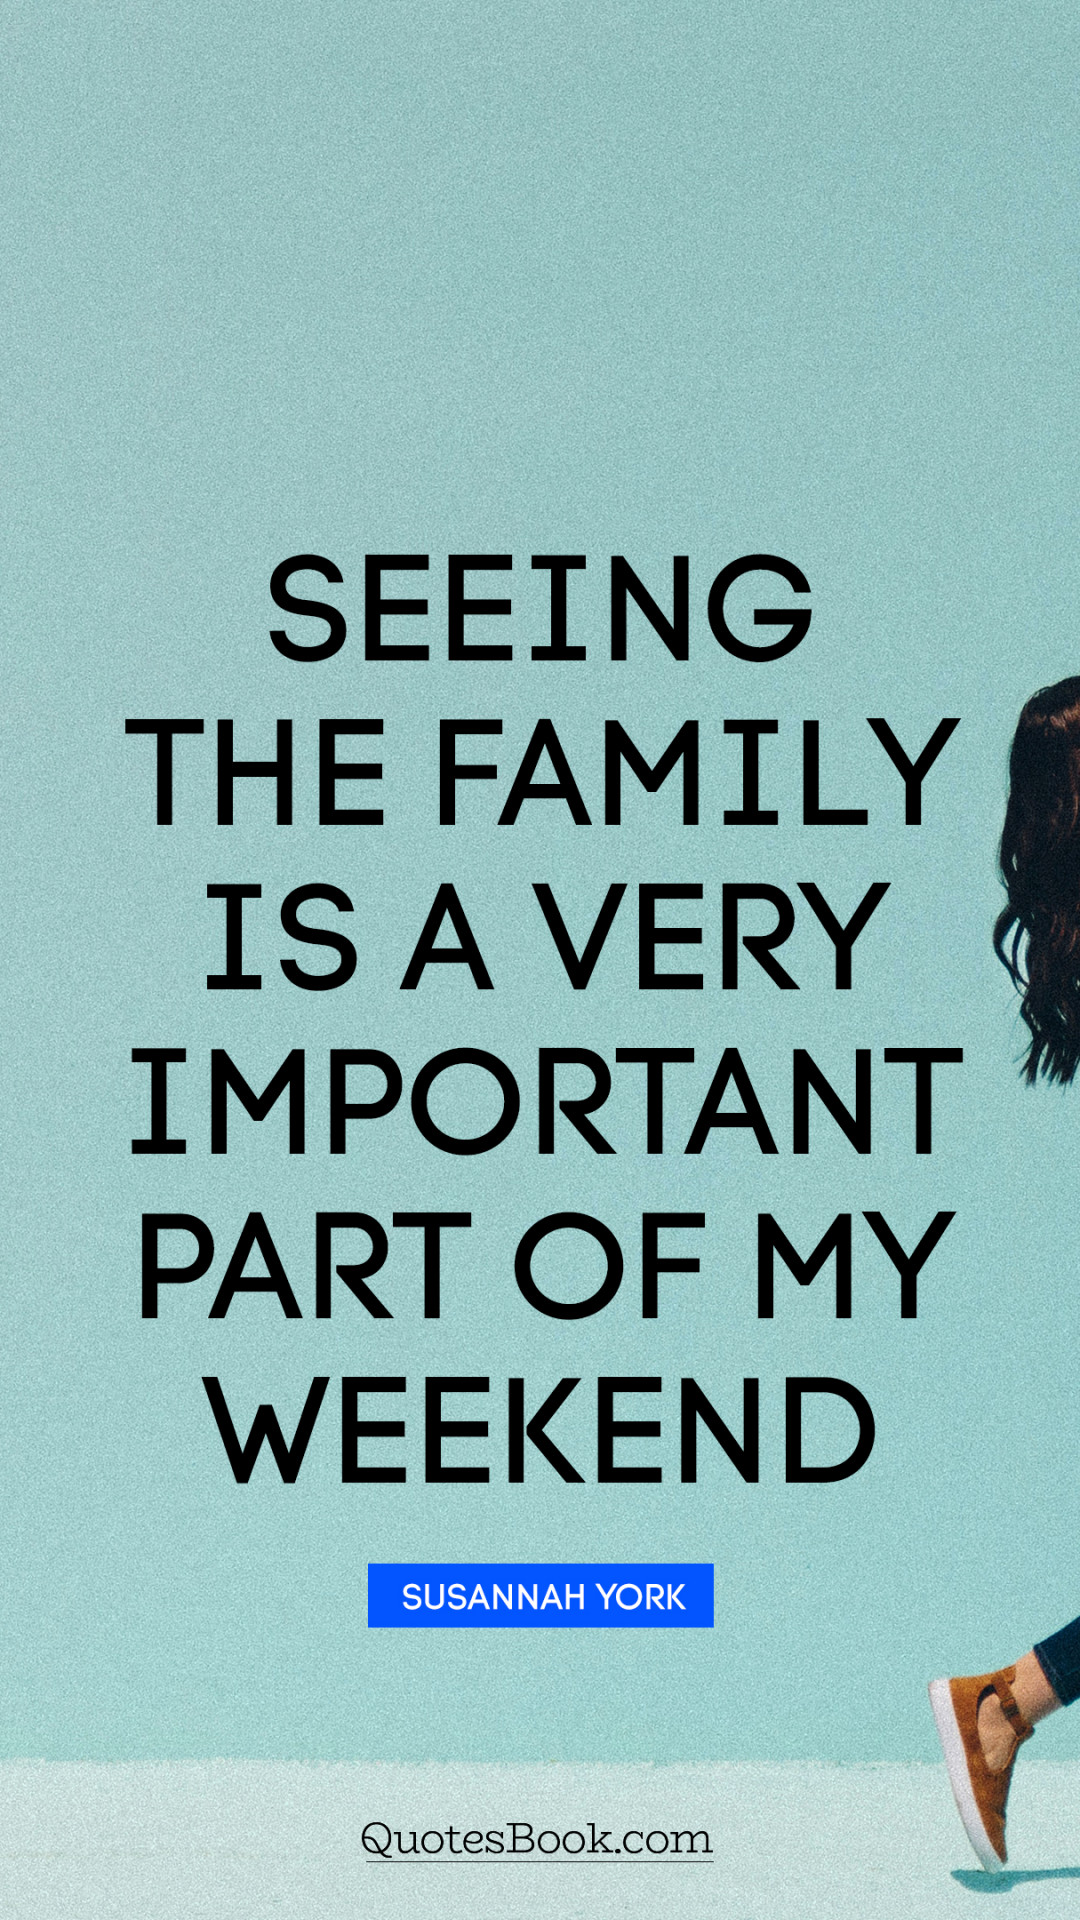 Seeing the family is a very important part of my weekend. - Quote by